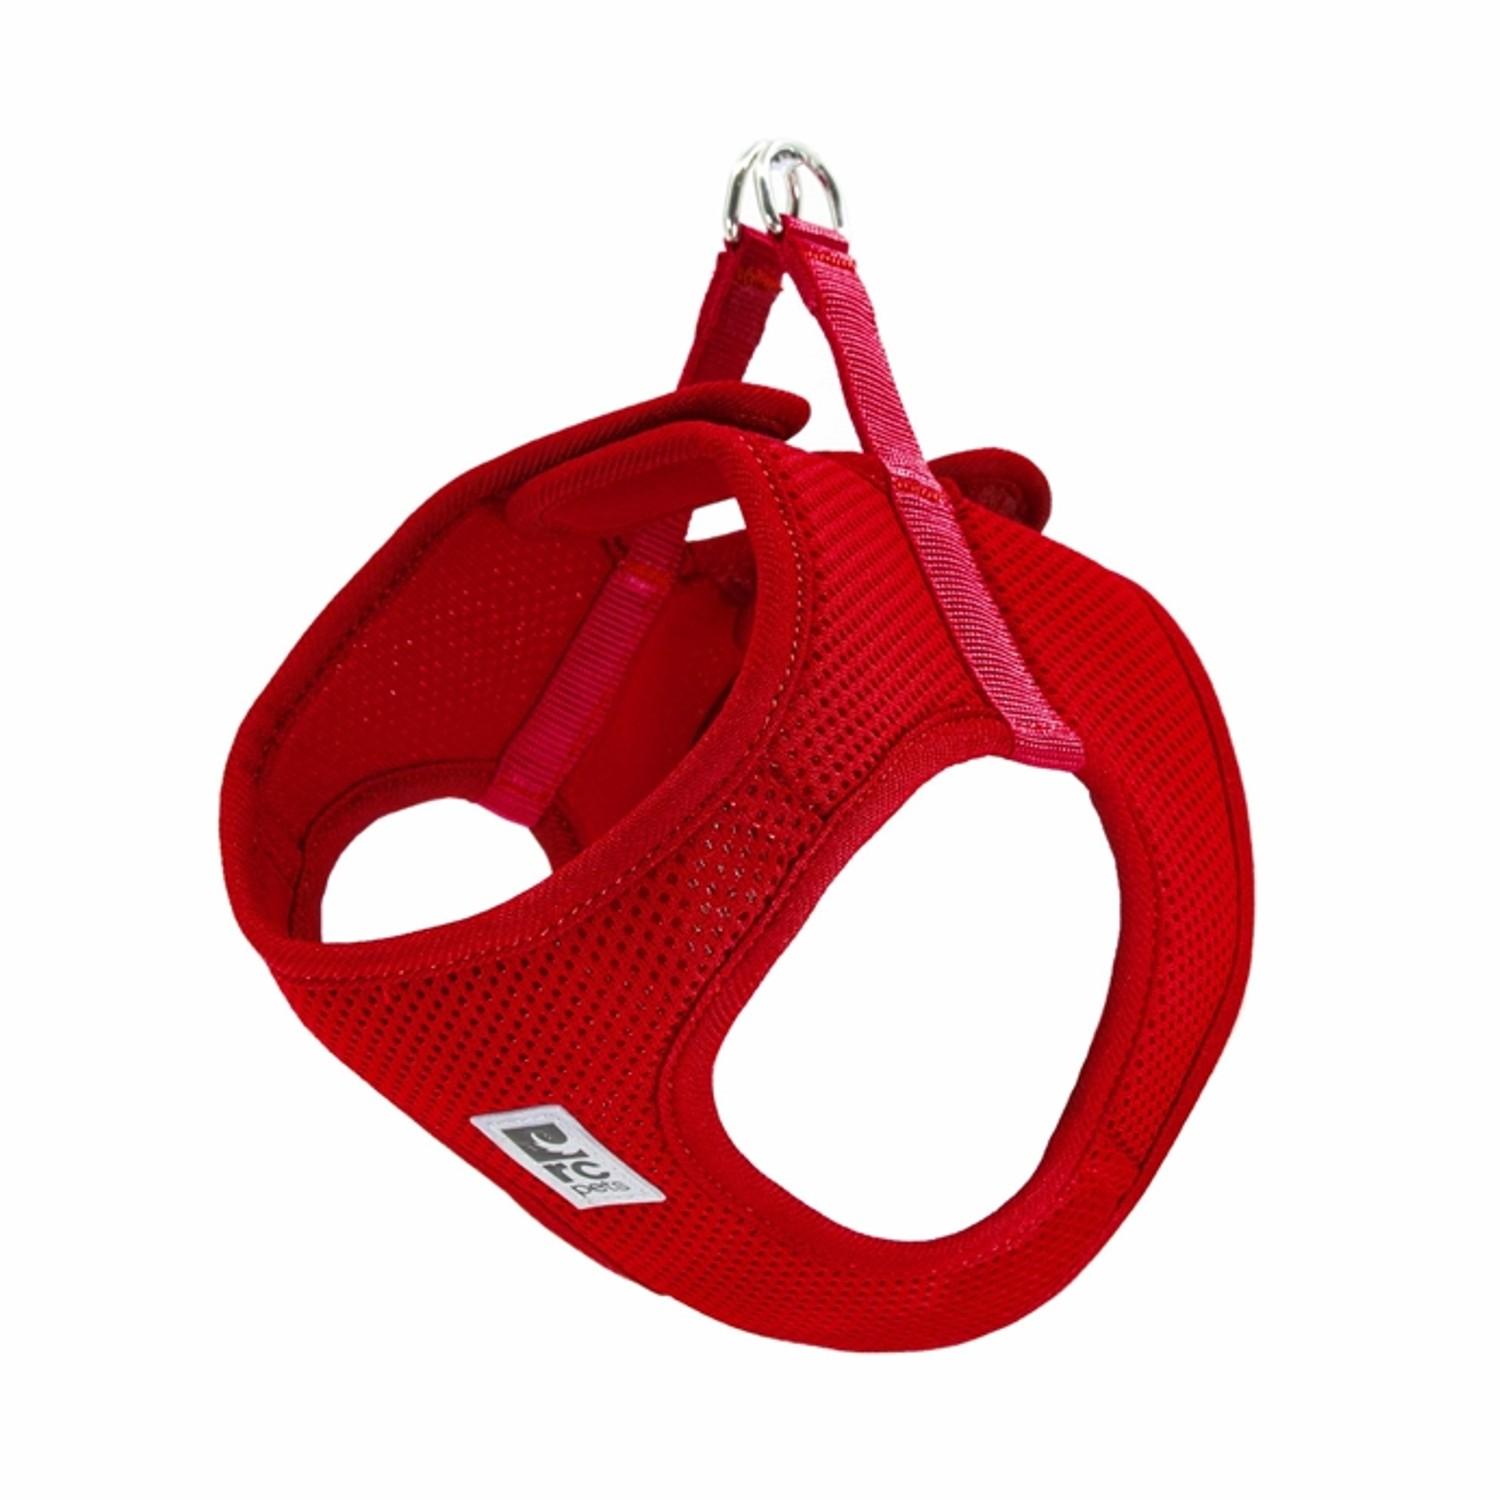 Step-in Cirque Dog Harness - Red